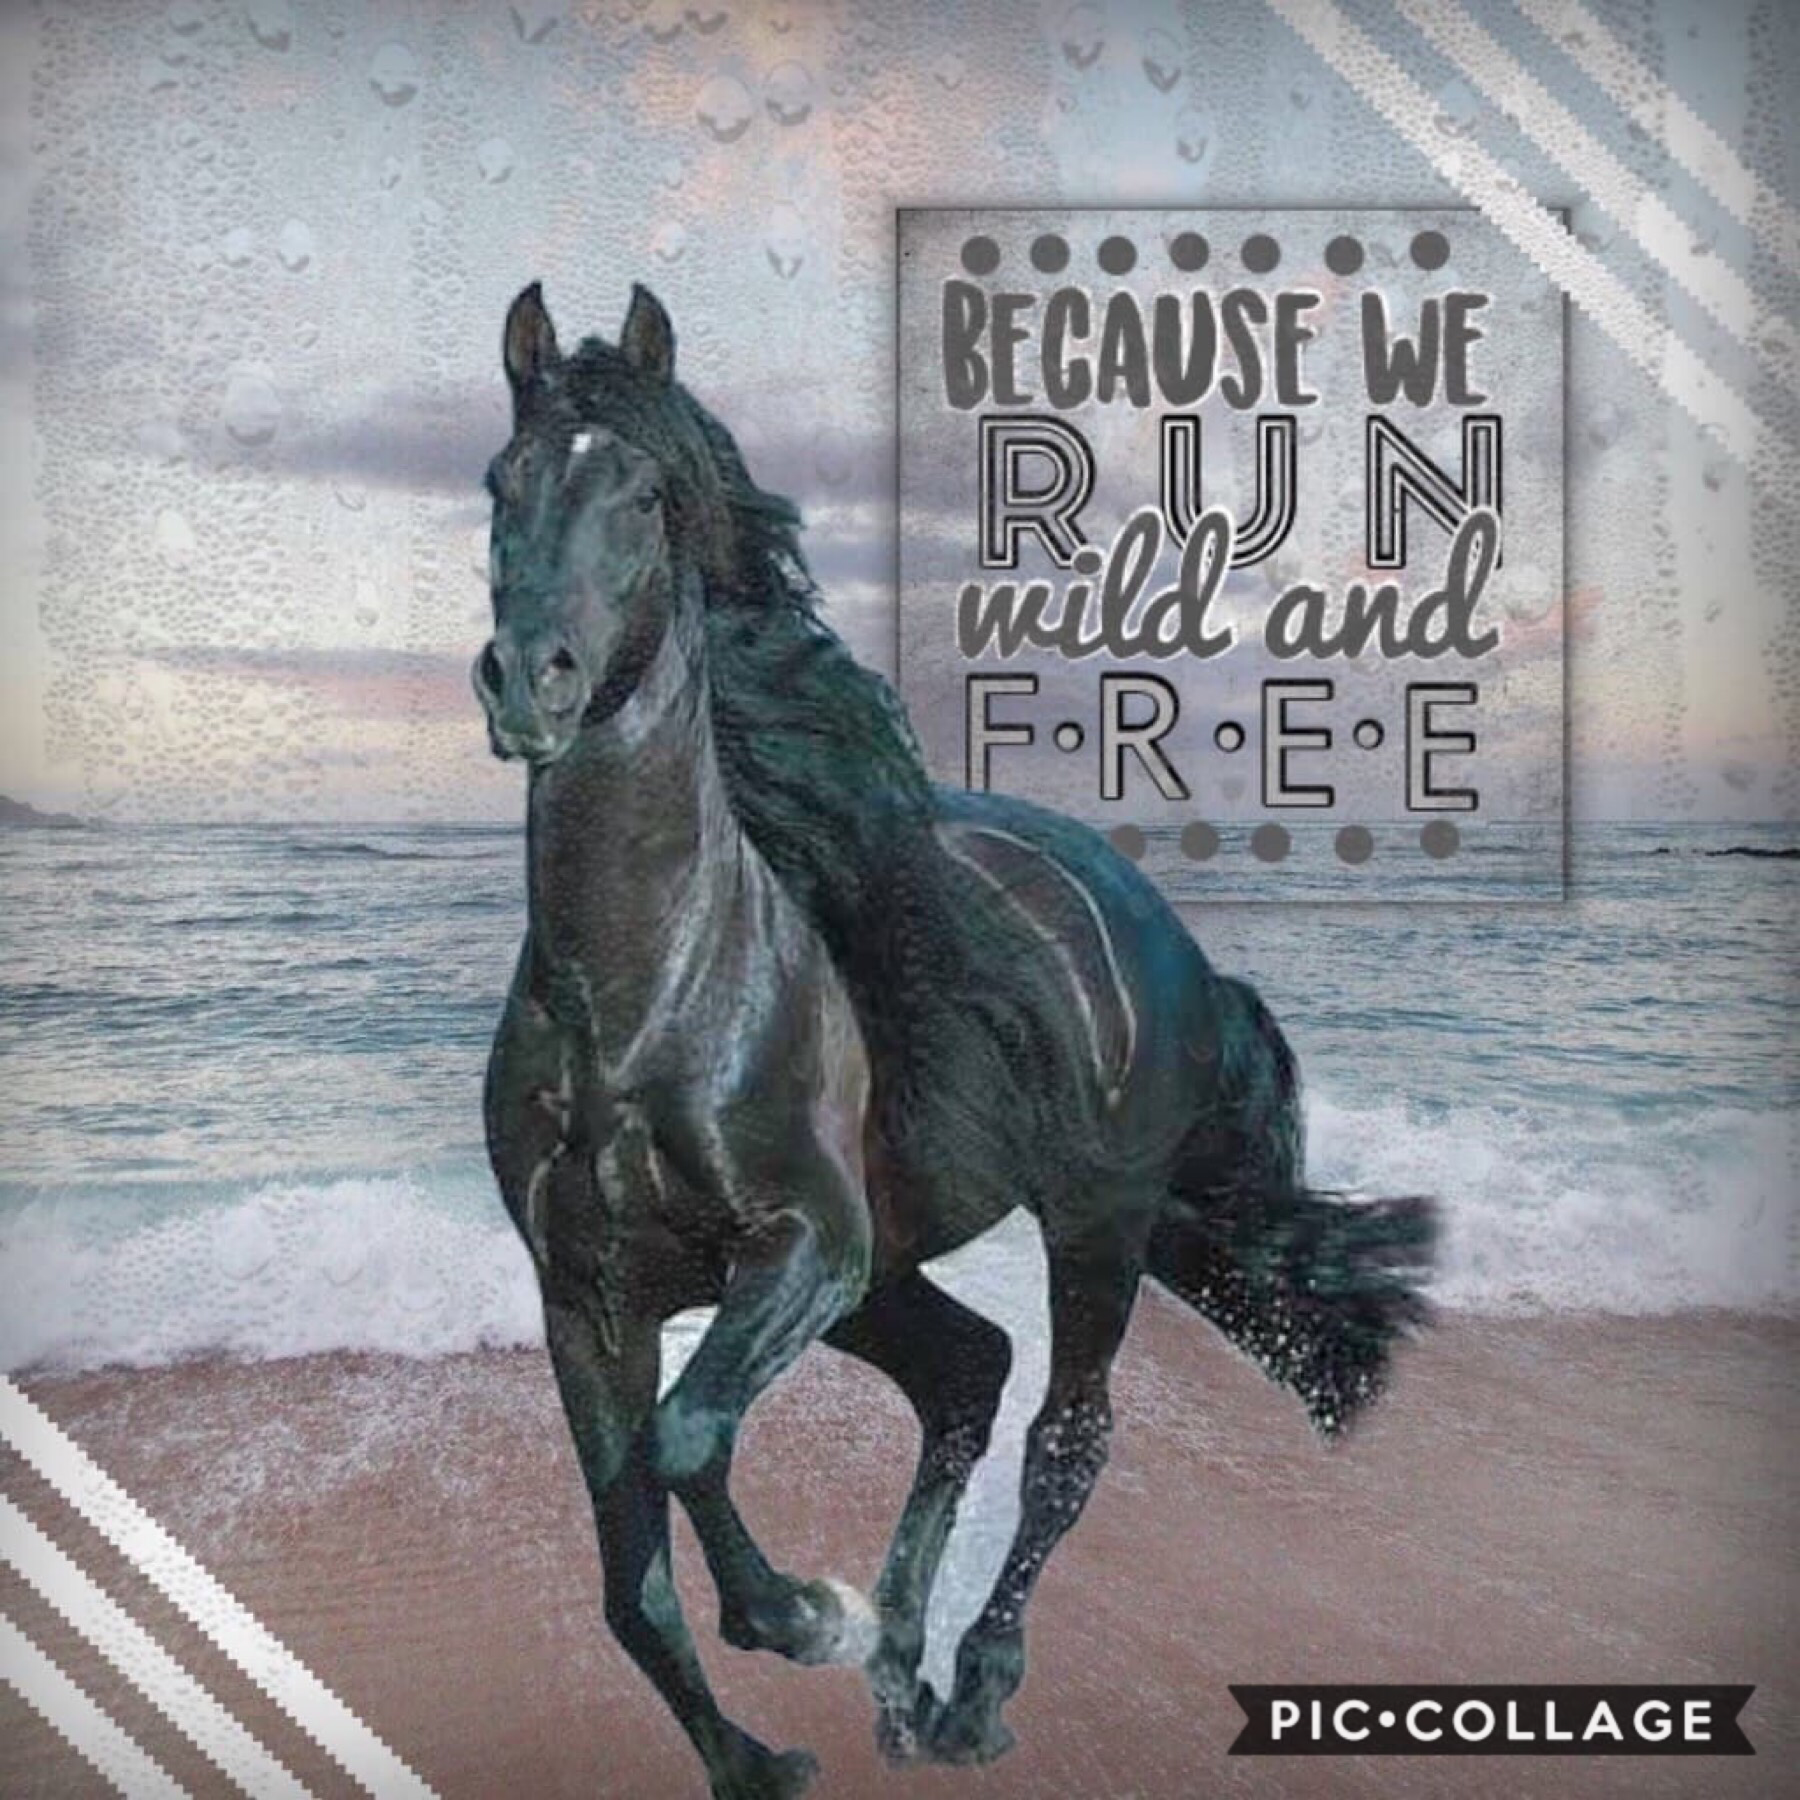 My entry to a contest! The picture reminds me of The Black Stallion. It’s a super good book and movie you should watch or read it!